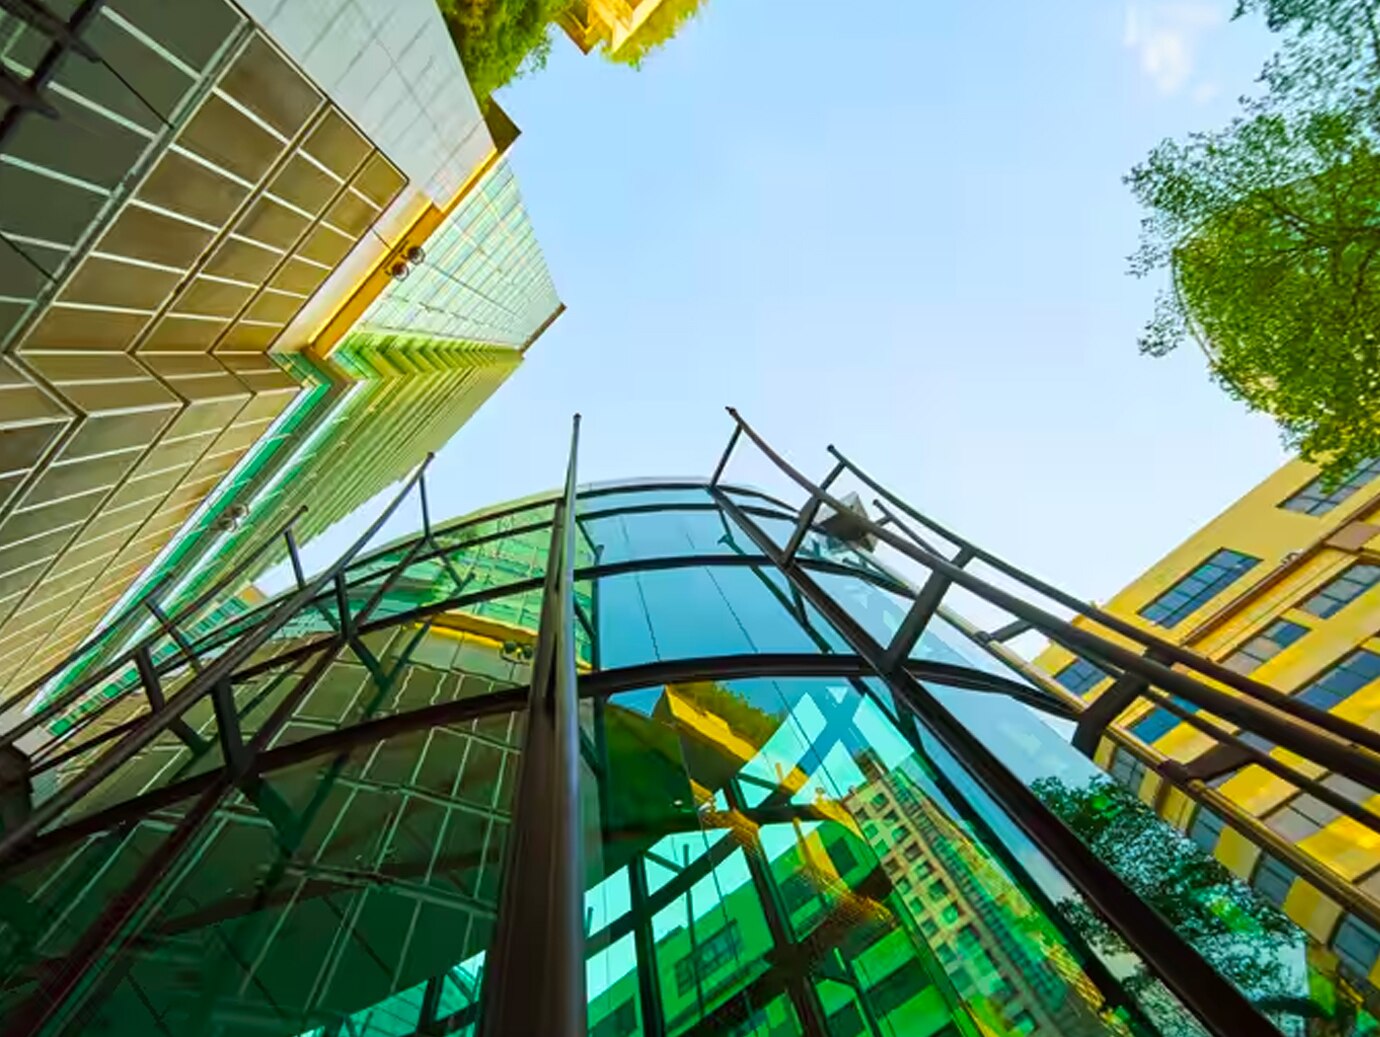 Exterior of glass office building surrounded by greenery